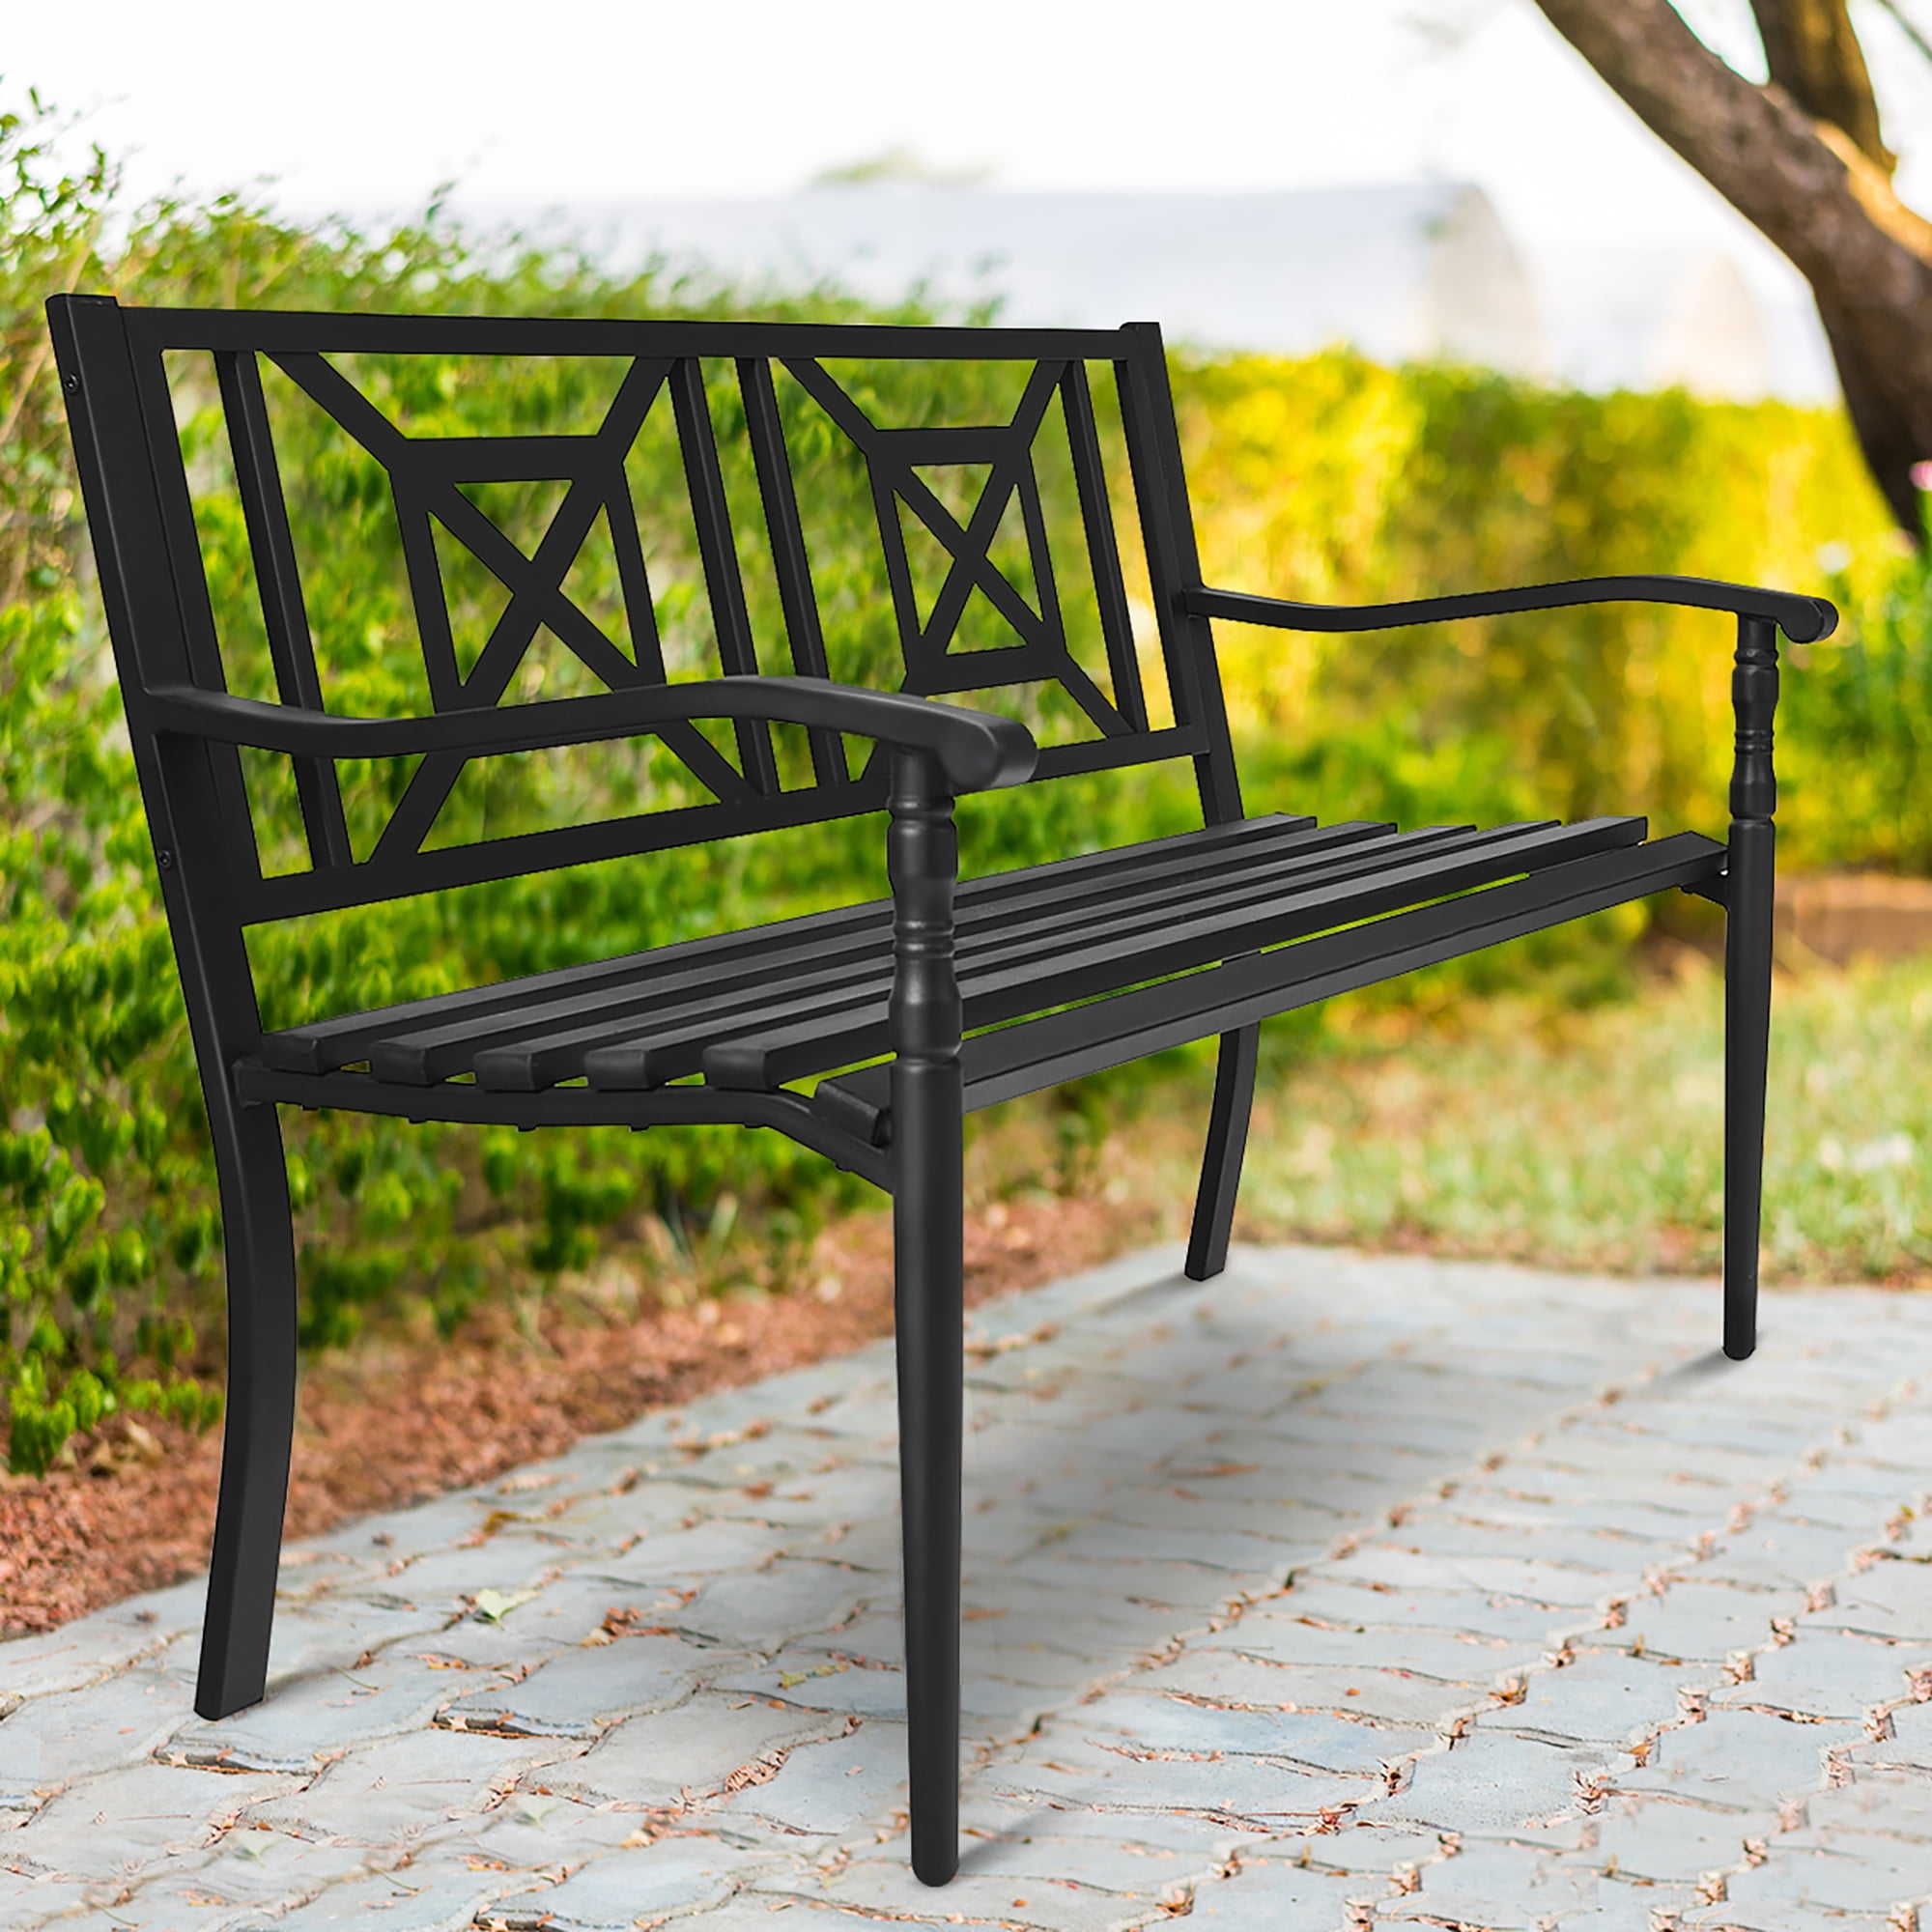 QLLL 5 Feet Fashion and Novel Backless Garden Bench Patio Park Bench with Stainless Steel Frame Porch Metal Bench Ideal for Outdoors And Indoors